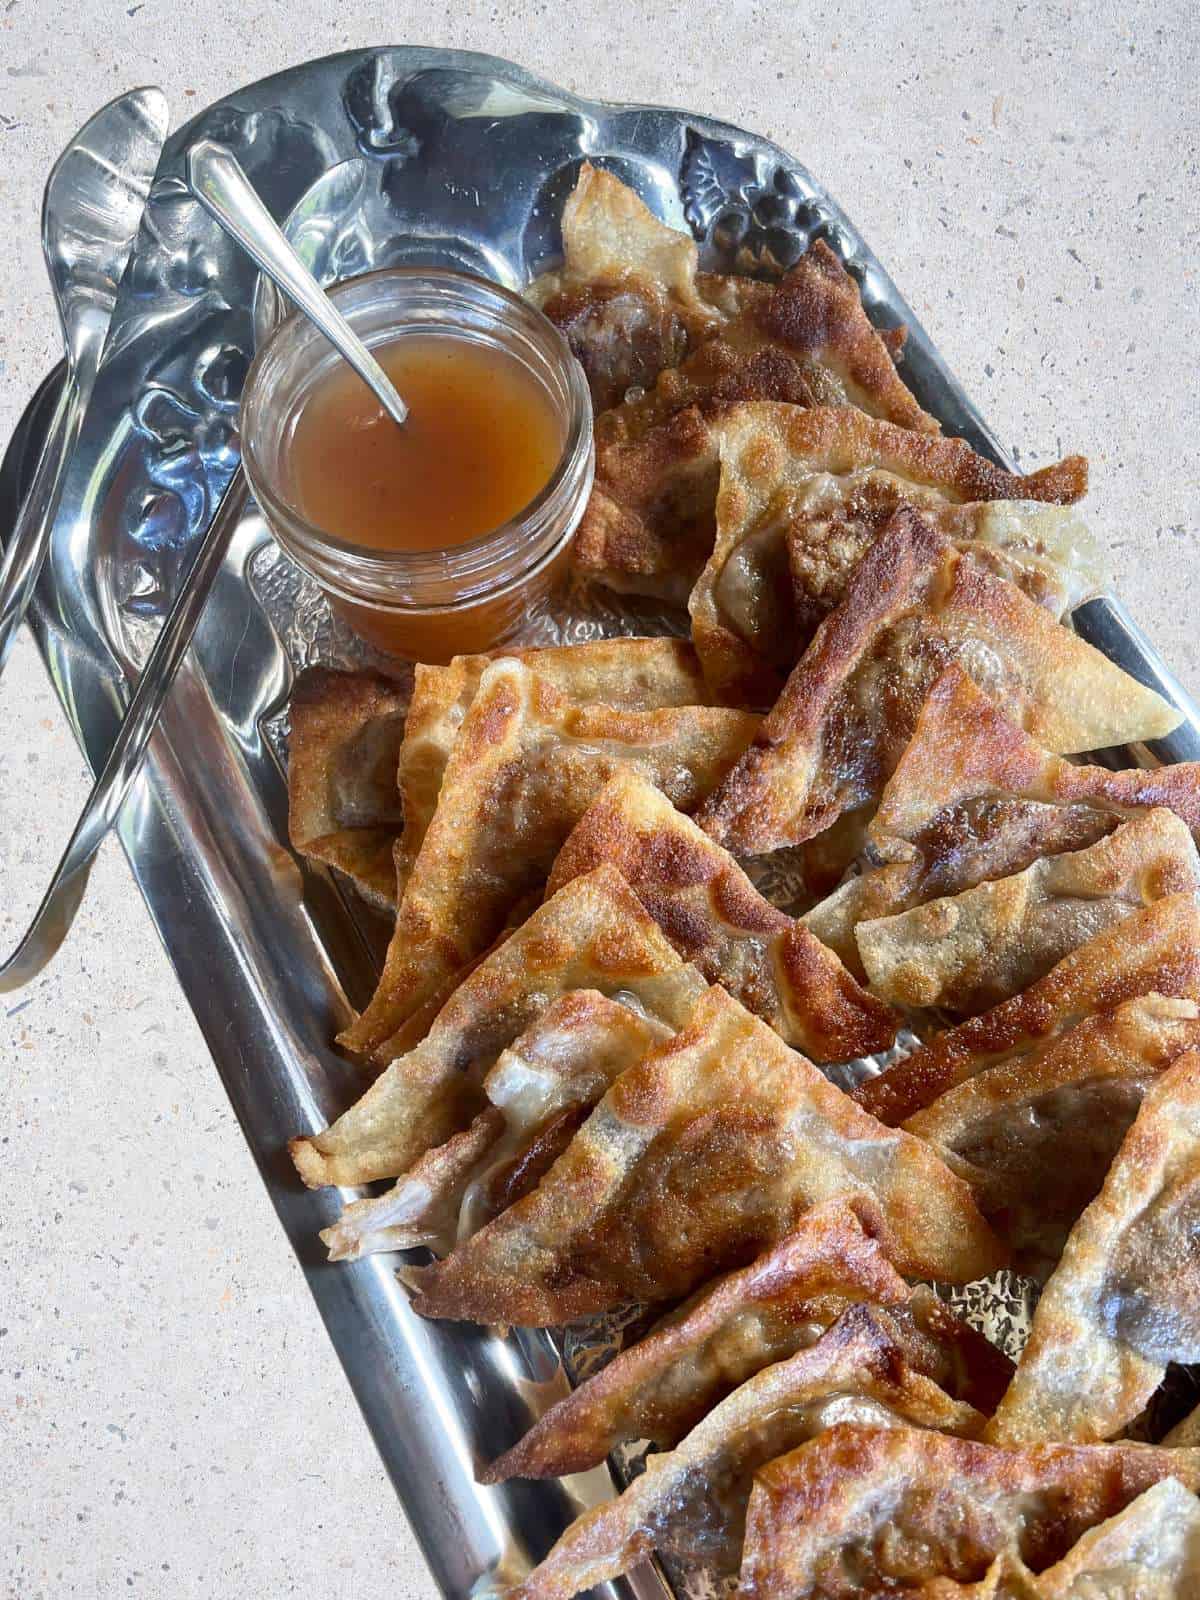 Fried kreplach with apricot dipping sauce on a silver platter.